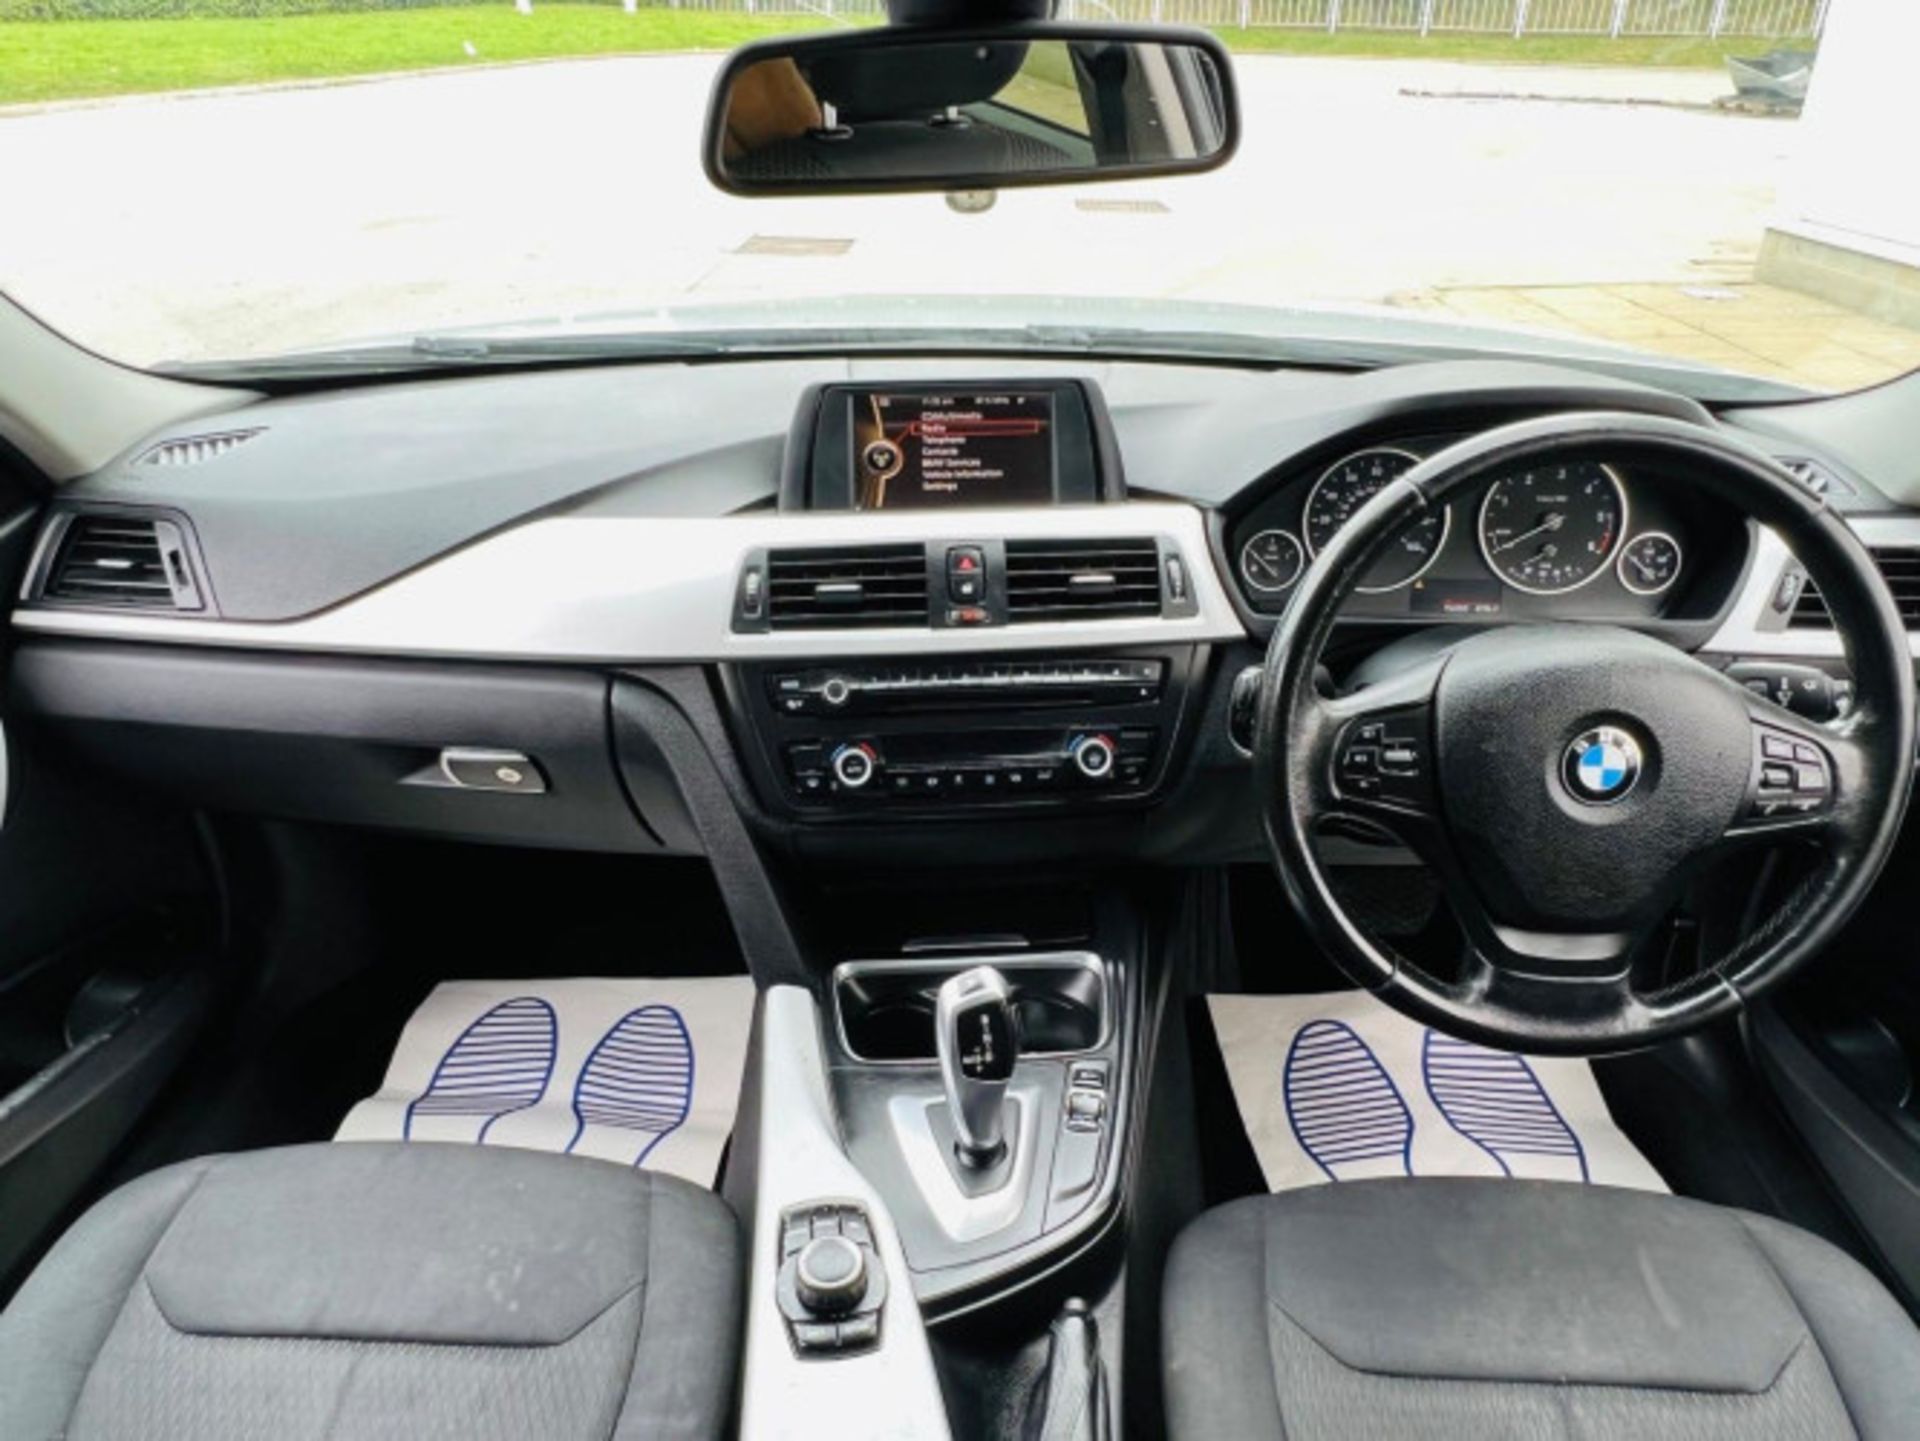 BMW 3 SERIES 2.0 DIESEL ED START STOP - A WELL-MAINTAINED GEM >>--NO VAT ON HAMMER--<< - Image 167 of 229